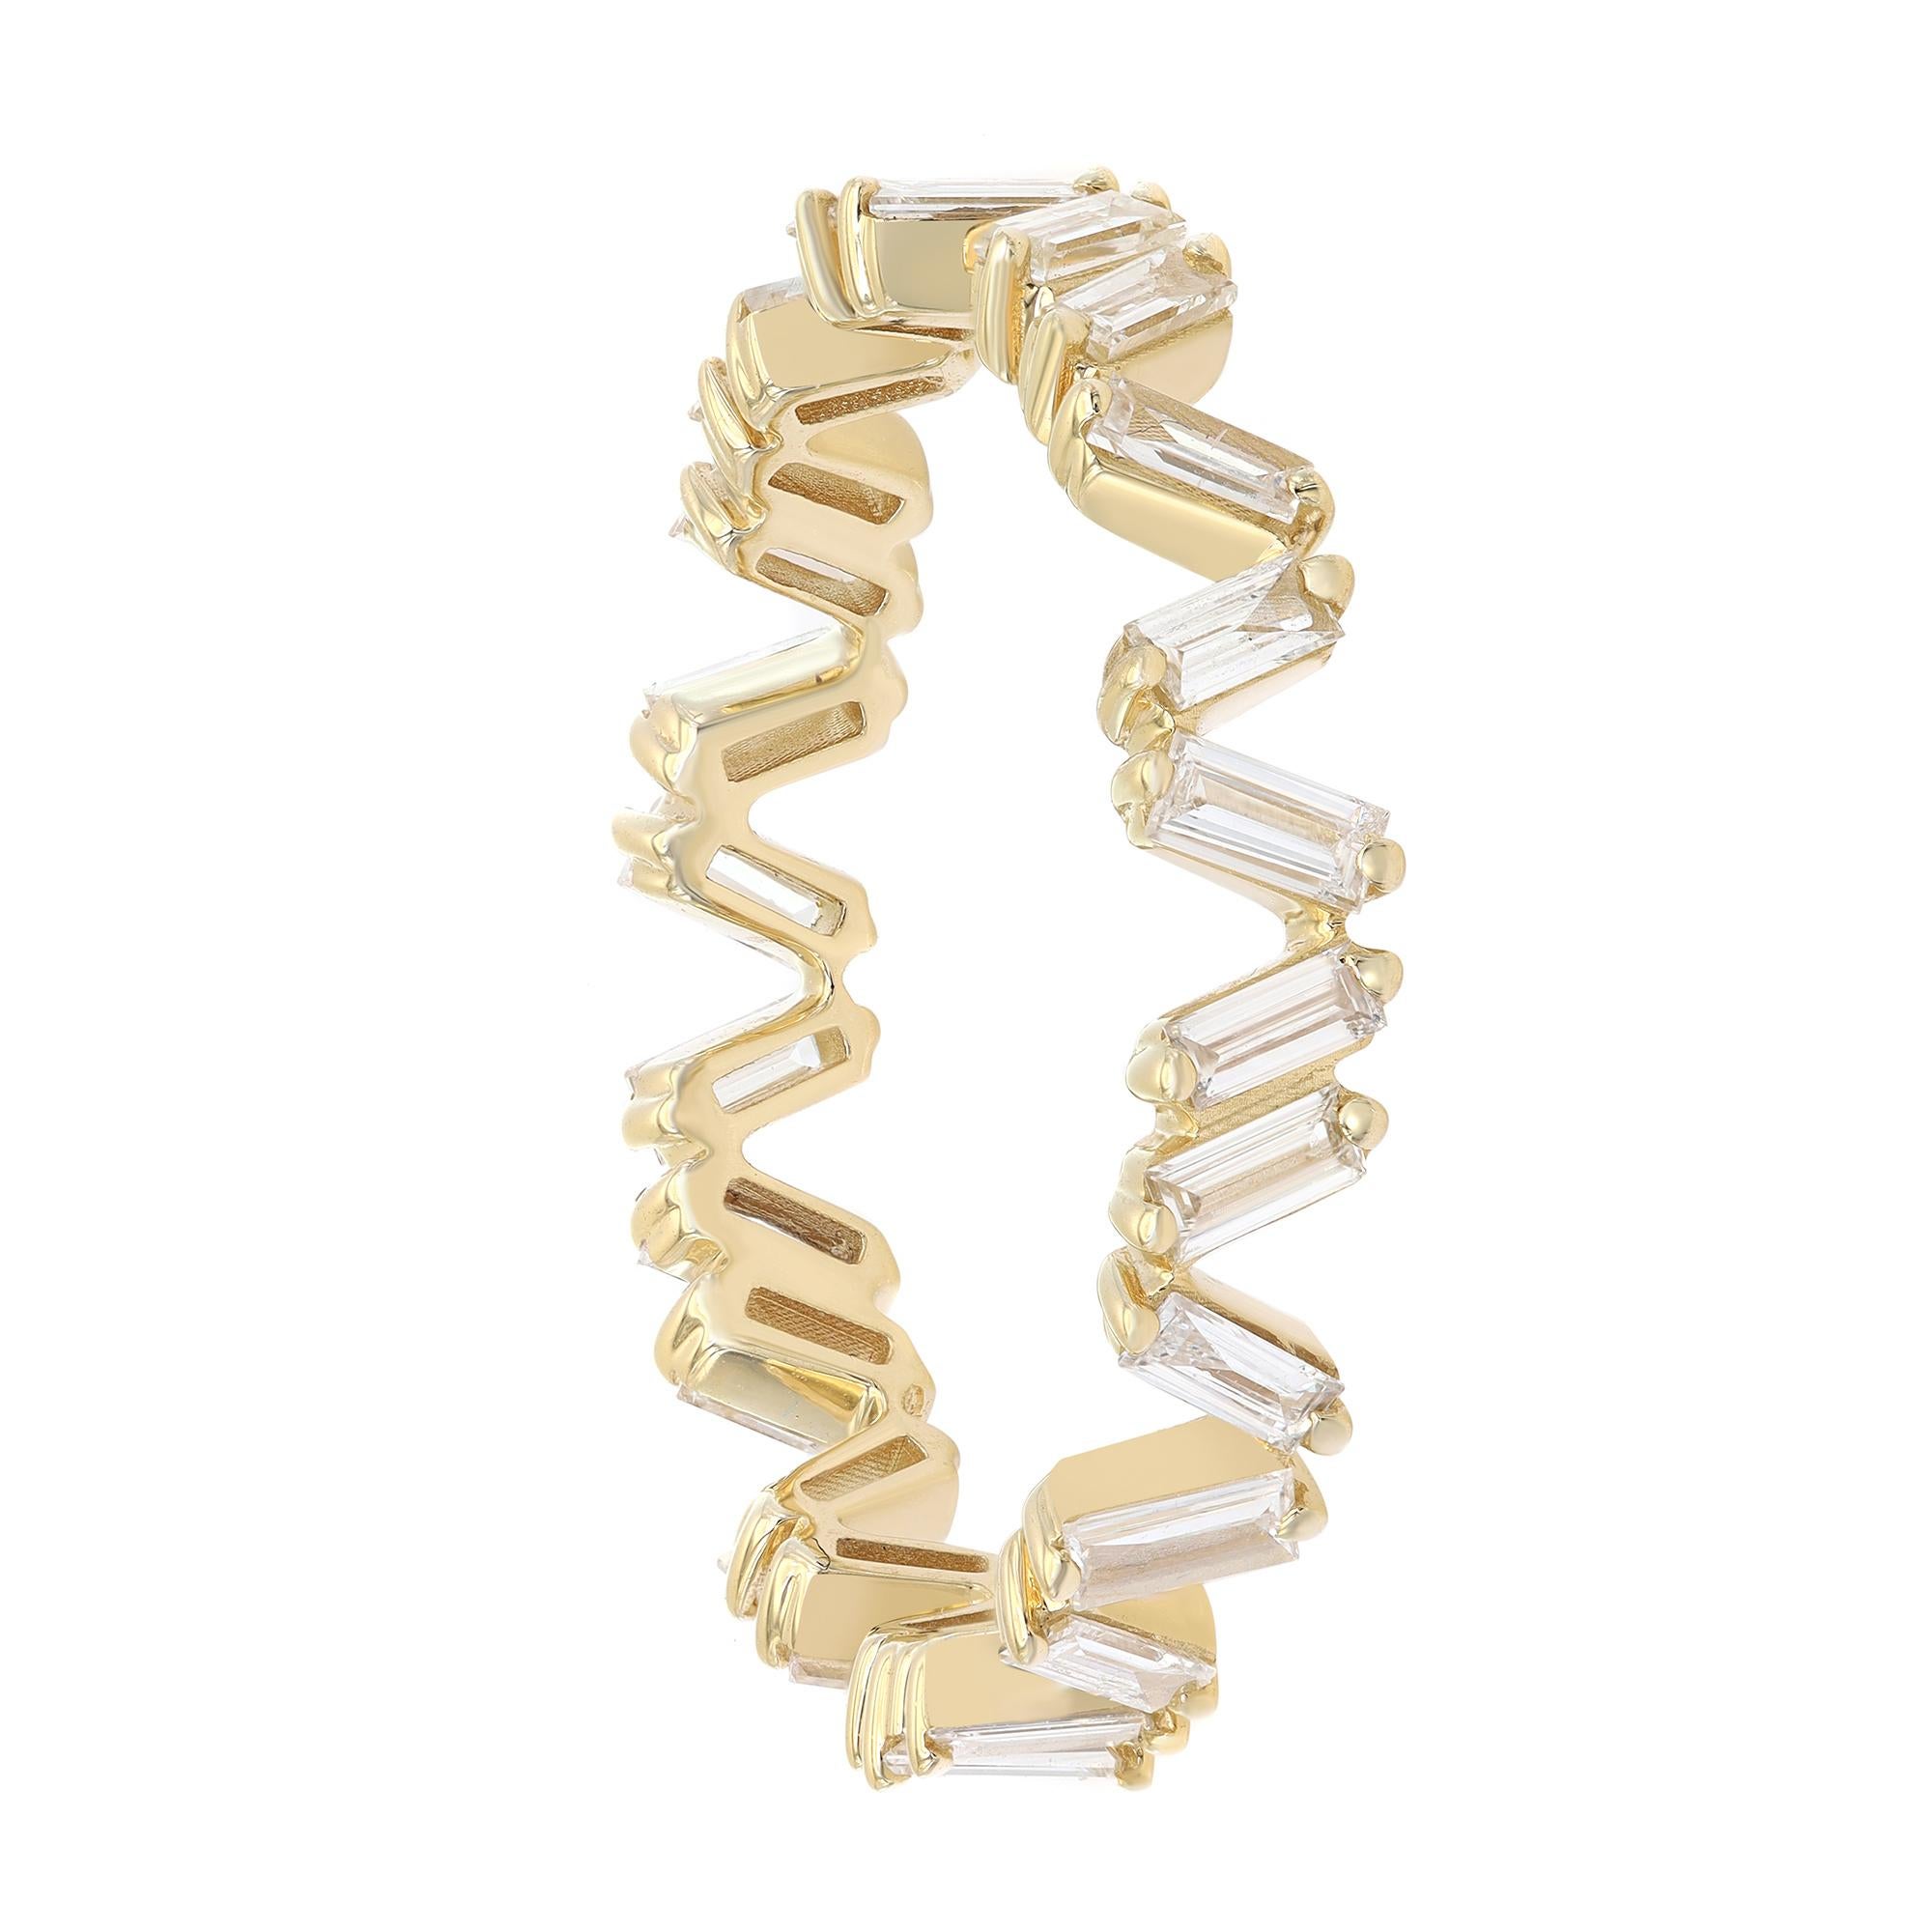 Sparkle with this 14k yellow gold diamond eternity band. This ring features 25 prong set baguette-cut diamonds set all around the ring in a zig-zag pattern. This piece is perfect for a gift or as a promise ring. Diamond color G-H and VS-SI clarity.